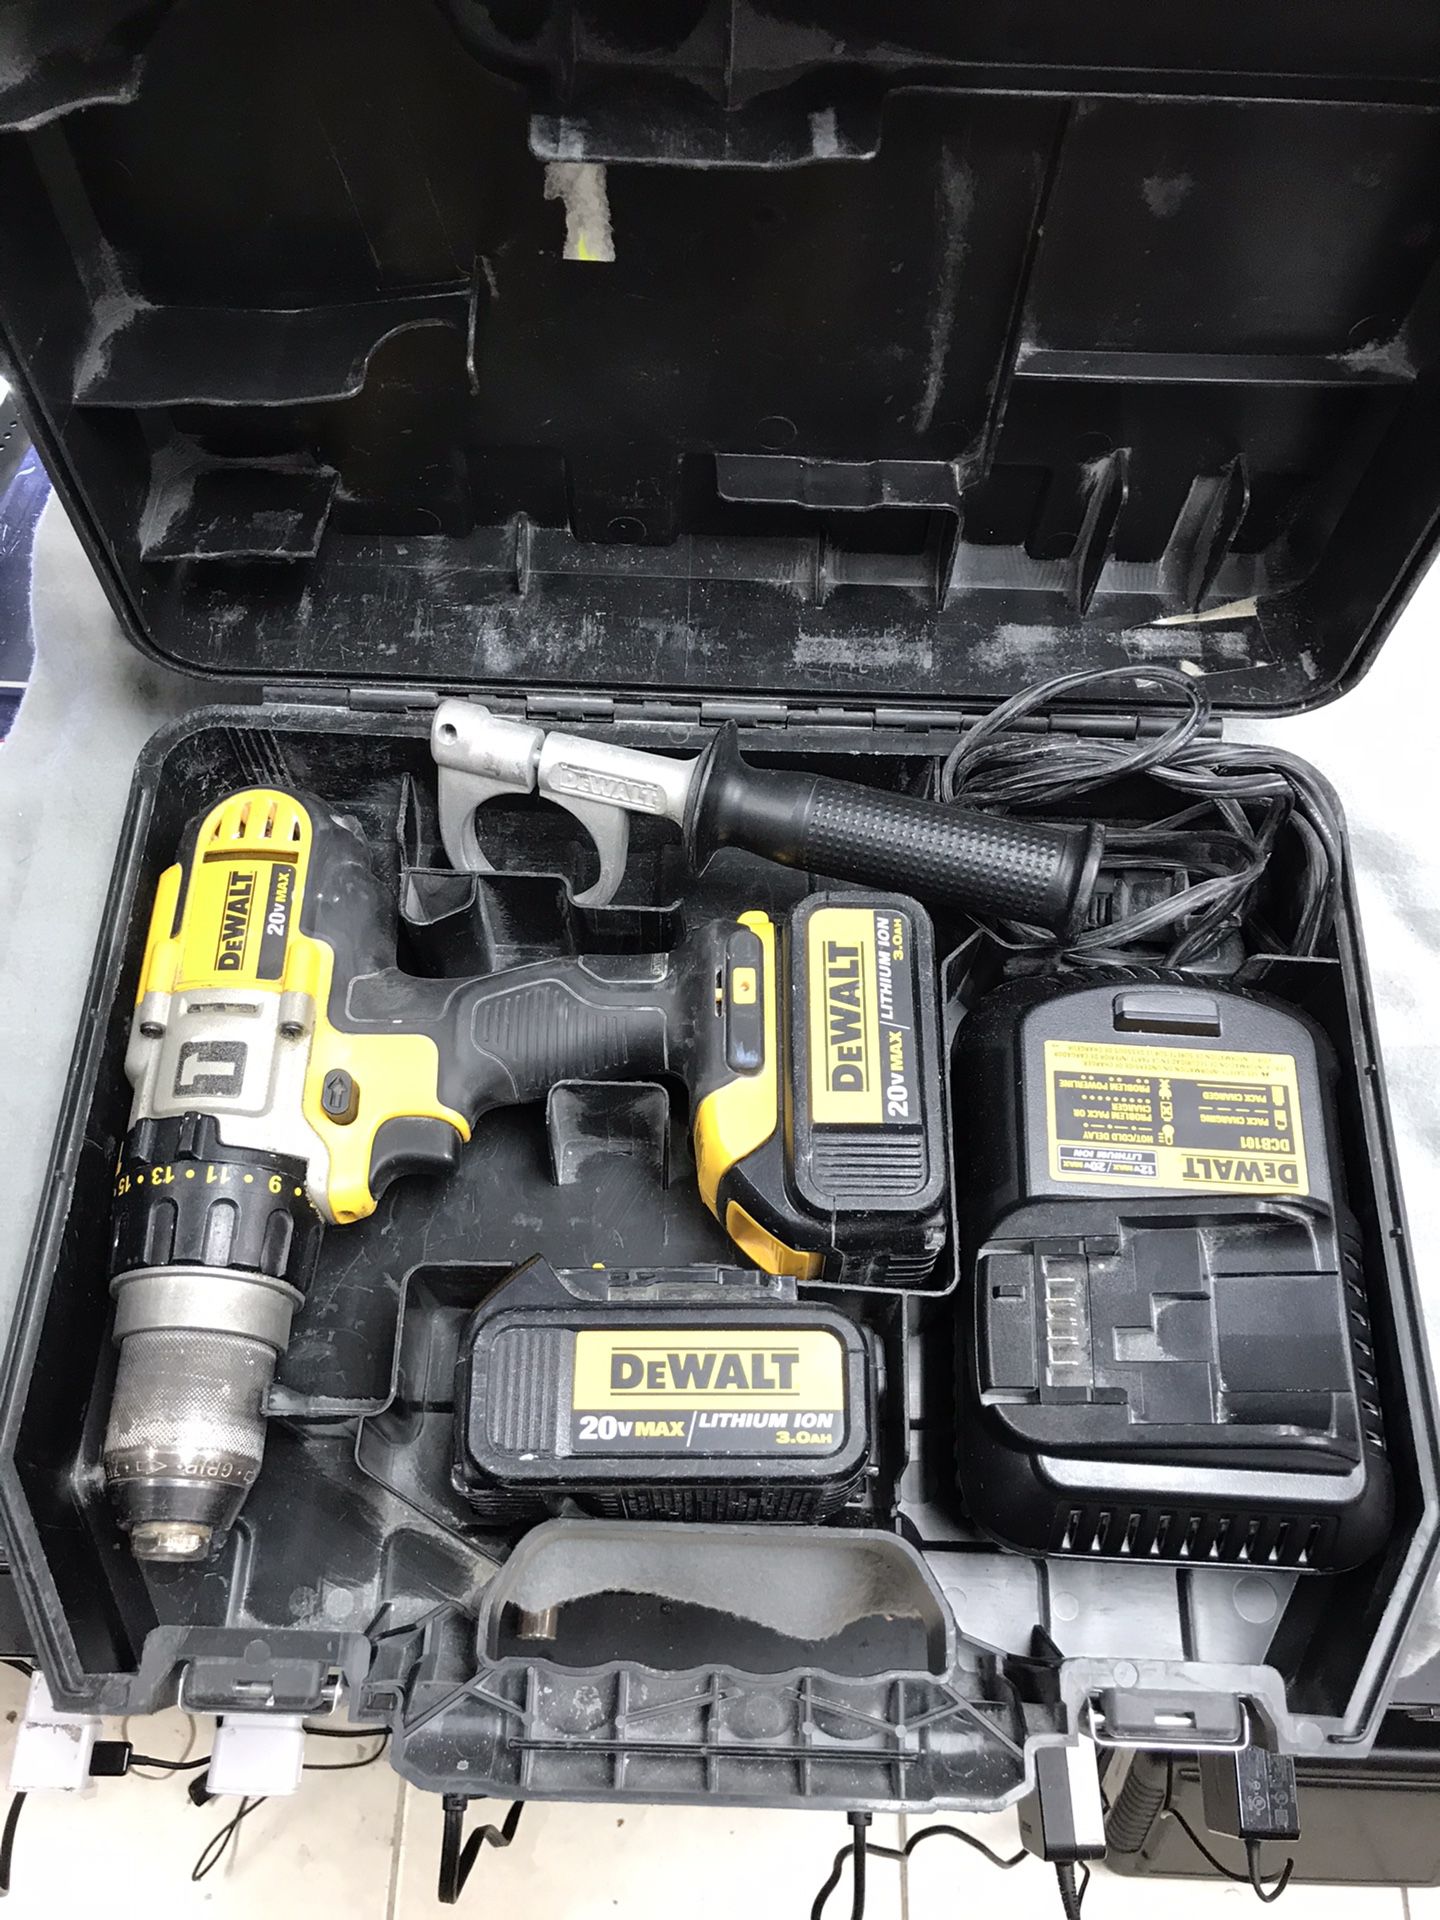 DeWalt DCD985 20V MAX 3 Speed Hammer Drill with (2) 3.0Ah Batteries, Charger and Cade